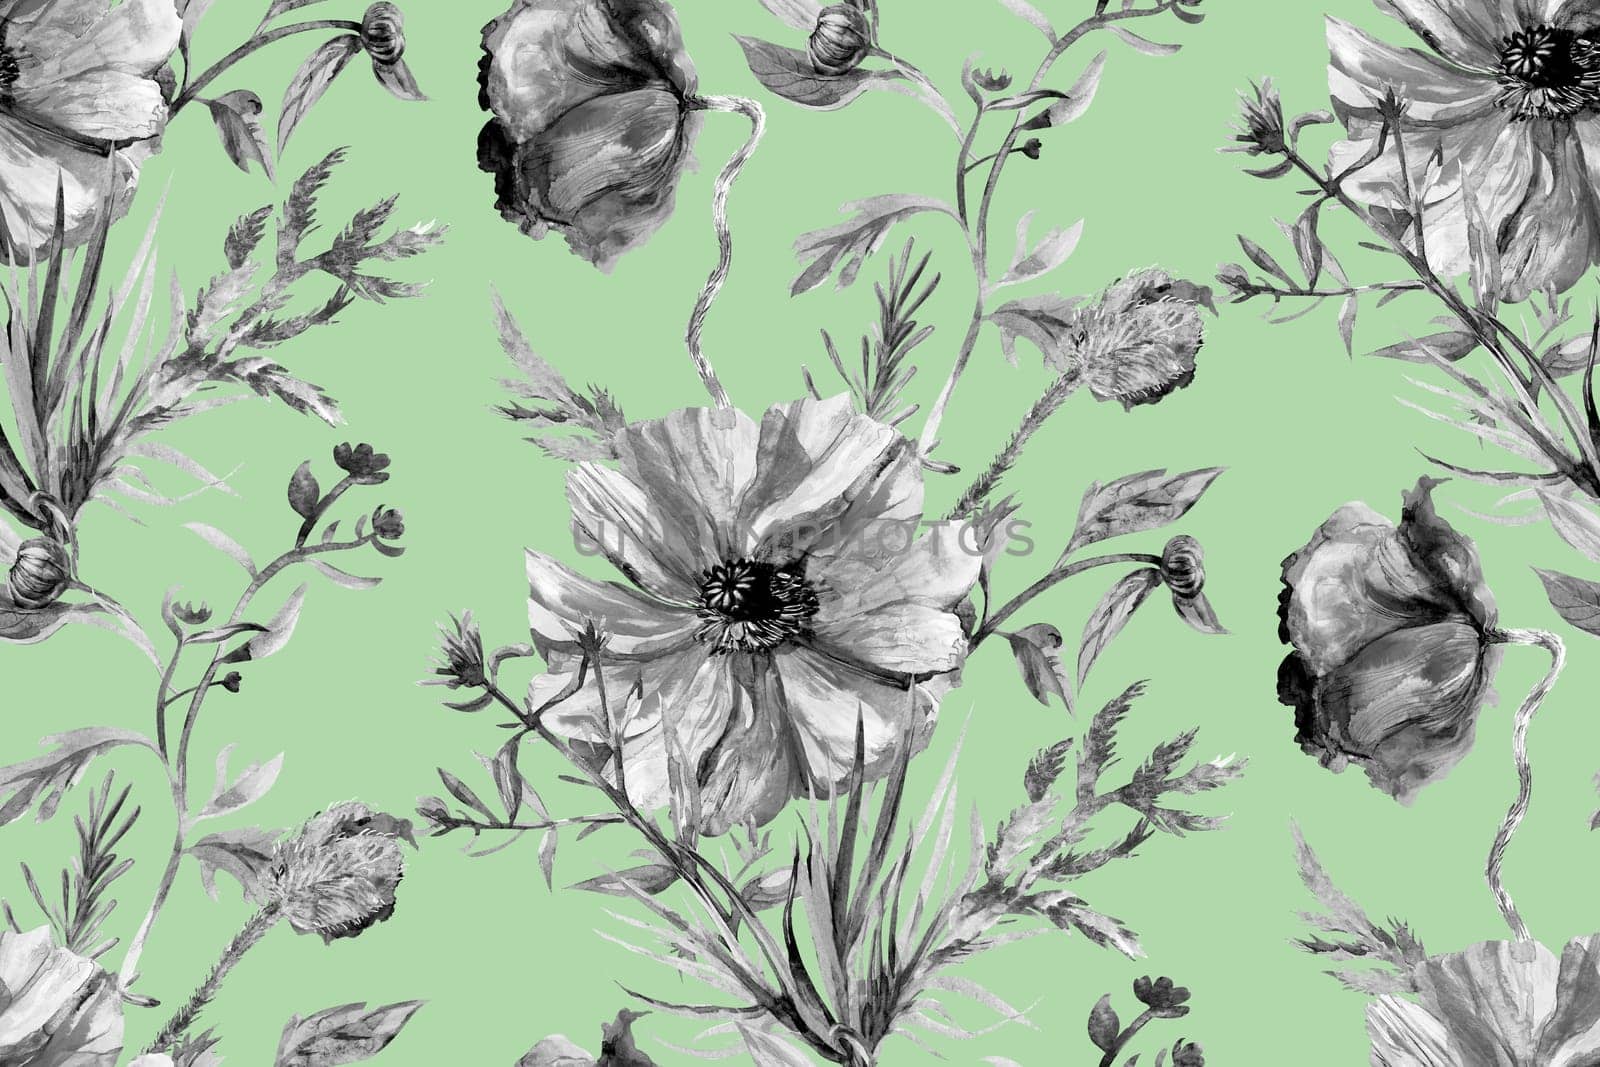 Seamless watercolor pattern with monochrome poppy and herb flowers on a light green background. Vintage motif for textile and surface design